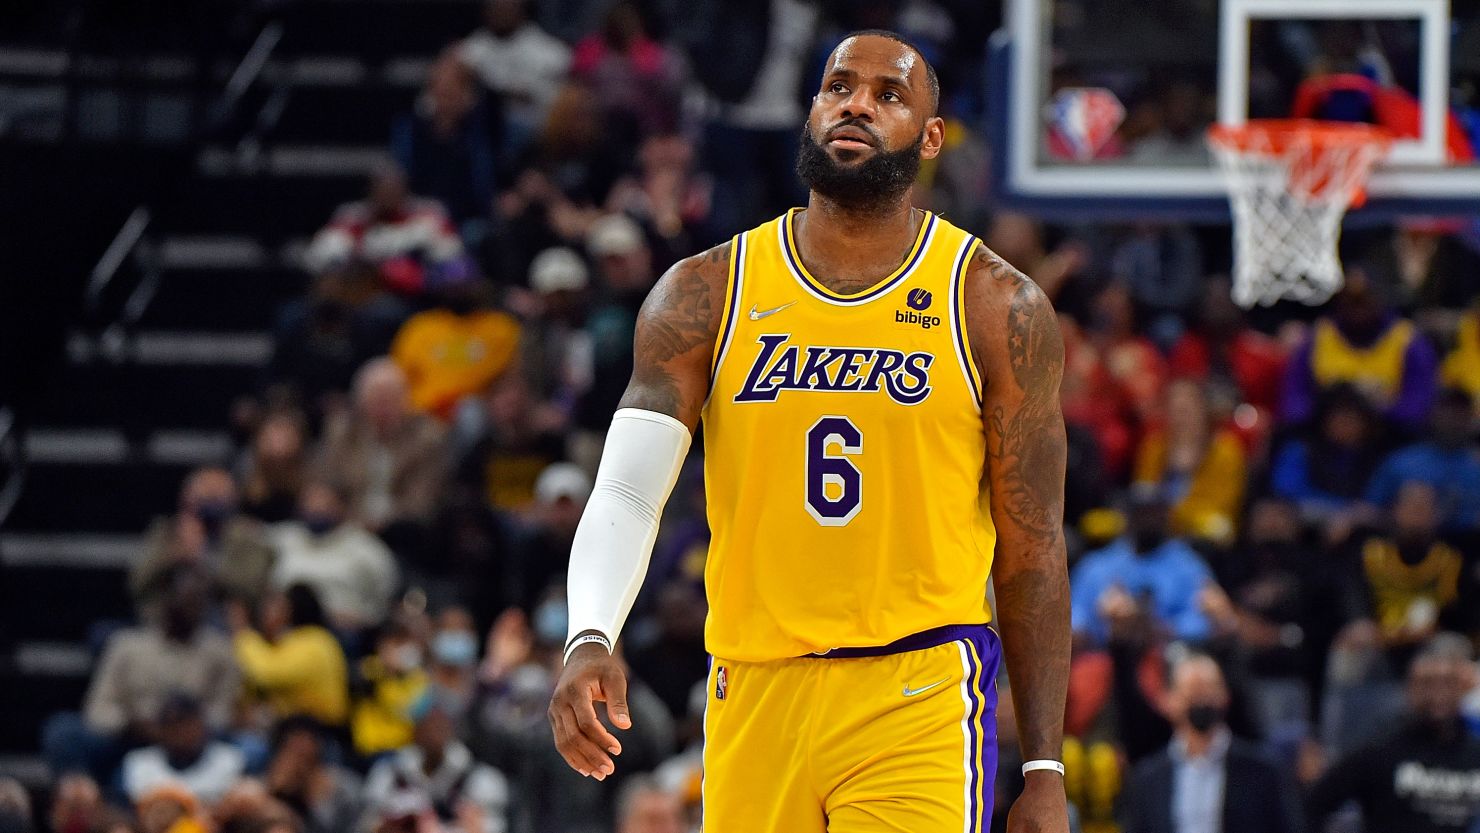 LeBron James' 100th career triple-double couldn't prevent the Lakers' defeat to the Grizzlies.